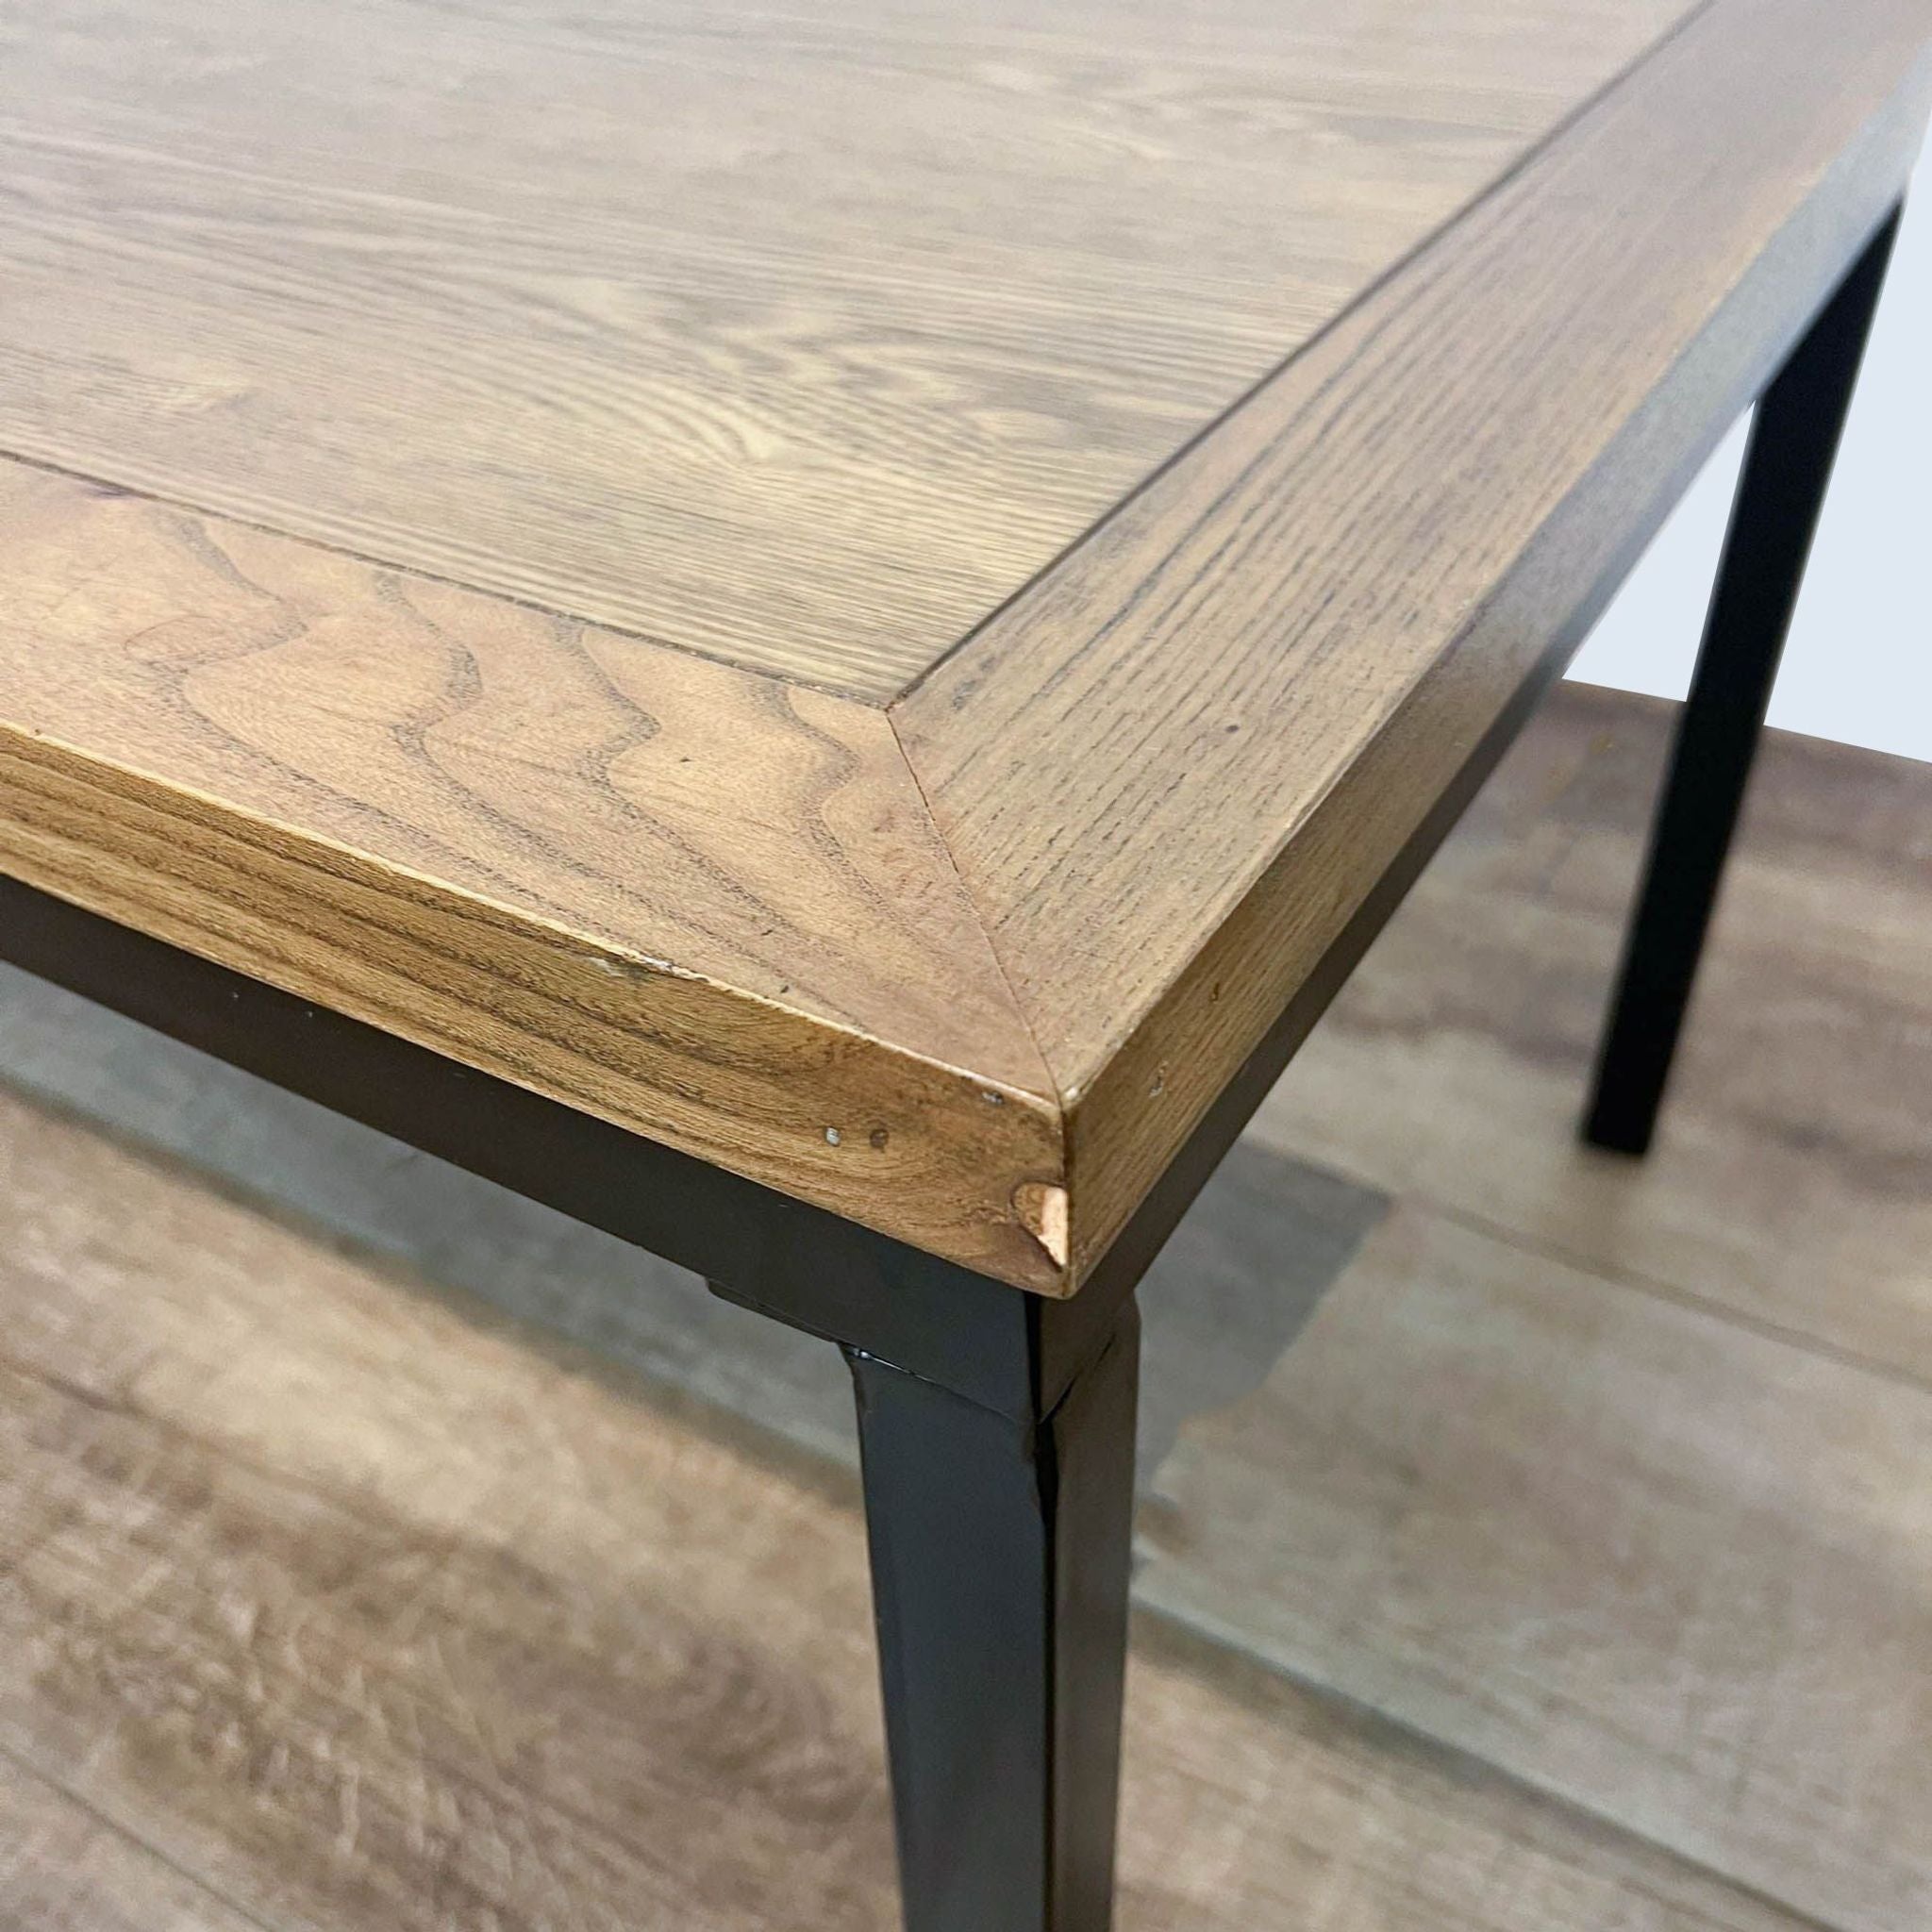 Close-up of Reperch coffee table corner showing the wood grain texture and metal leg attachment.